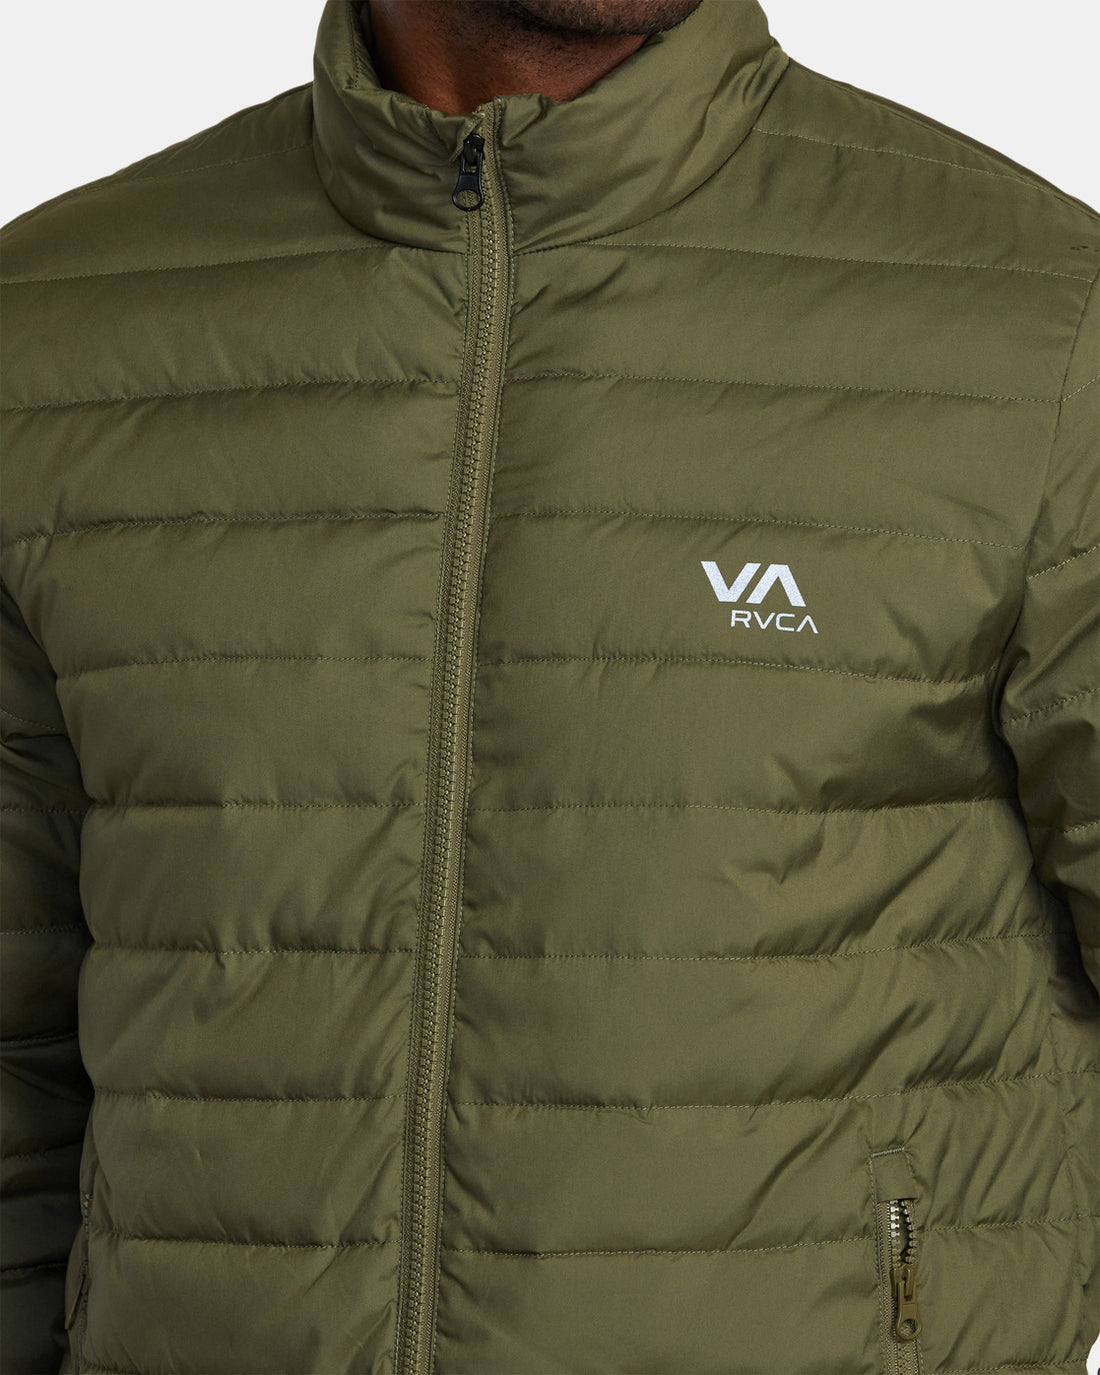 RVCA PACKABLE PUFFA JACKET - ARMY